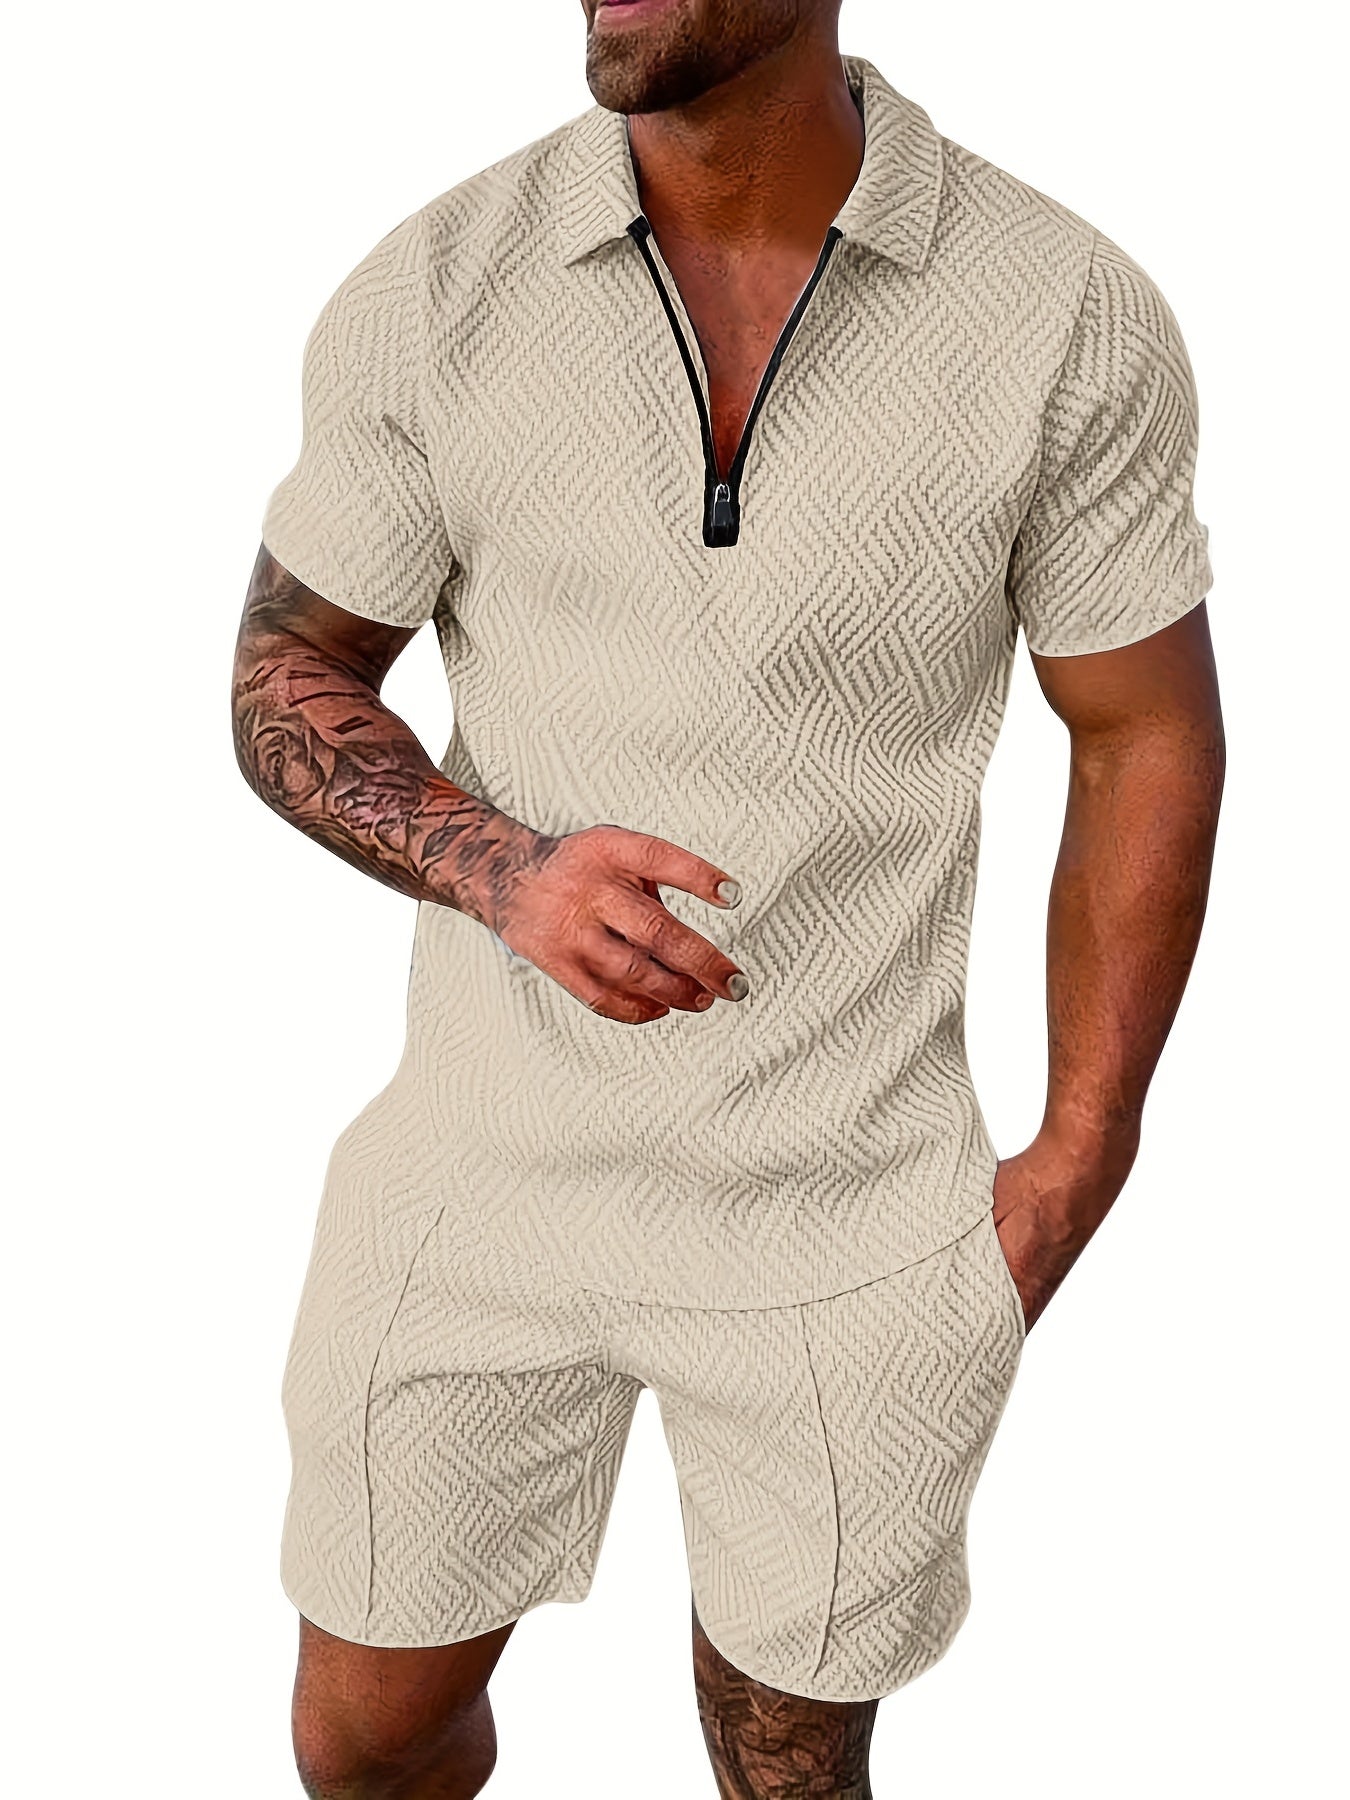 Men's Polyester Thin V-neck Zipper Sweatsuits With V-neck Zipper T-shirt & Shorts Christmas Gifts Best Sellers